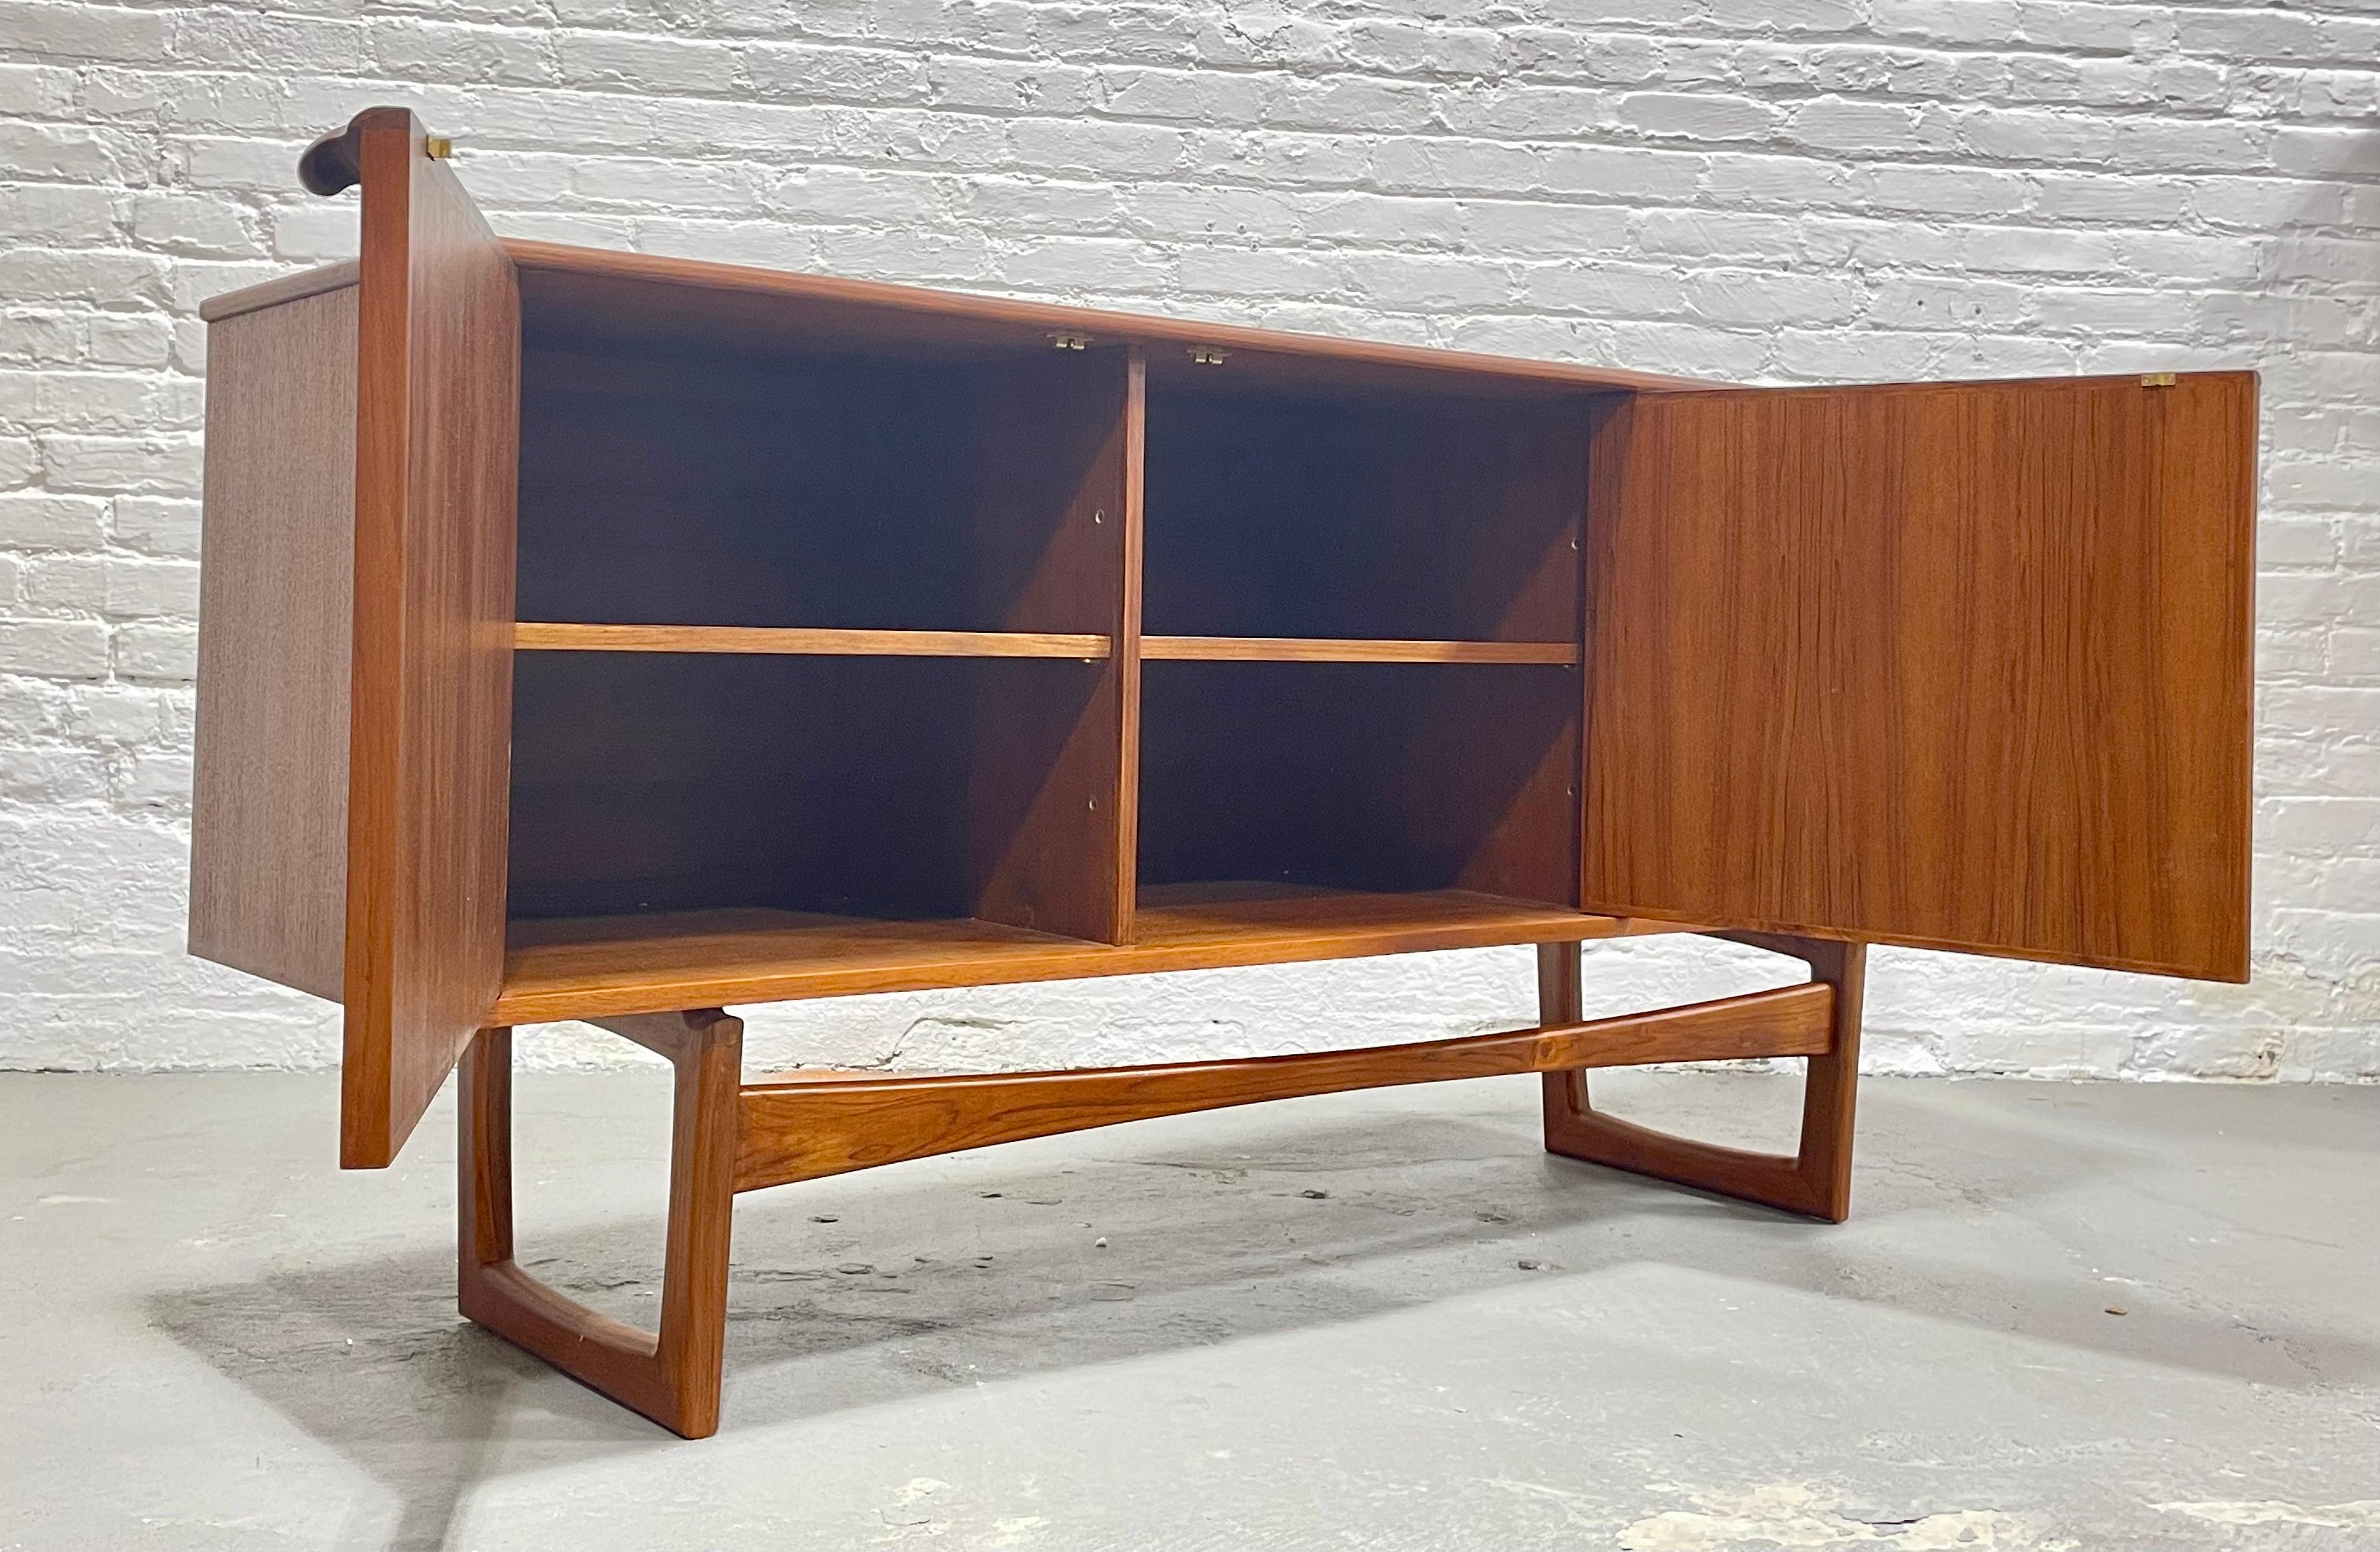 Sculpted Mid-Century Modern Danish Styled Credenza Media Stand For Sale 4